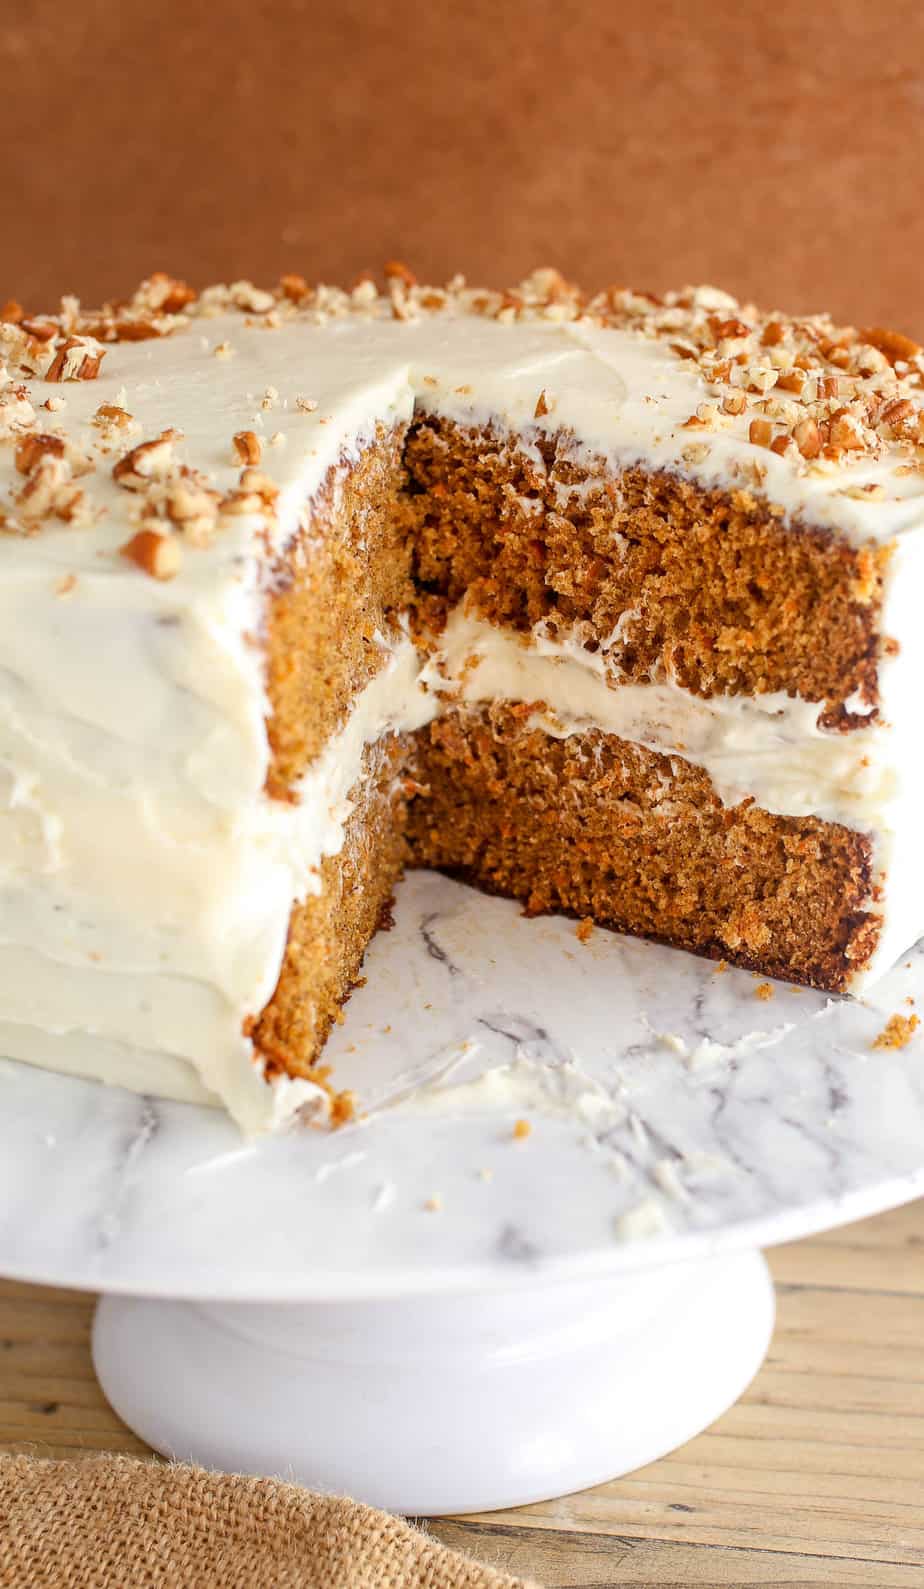 Carrot cake on a cake stand with a slice missing.